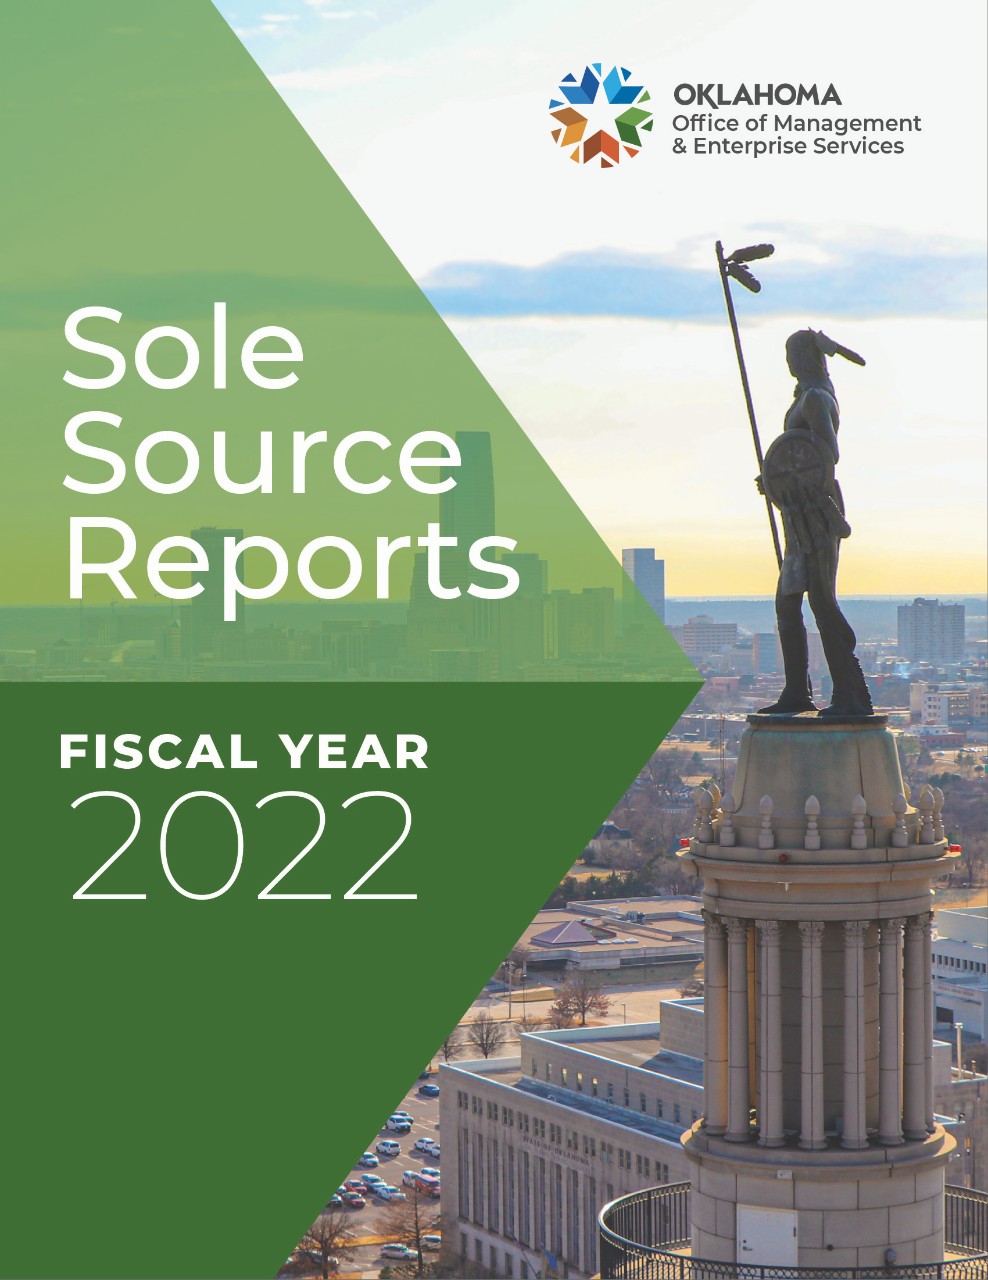 Sole Source Reports